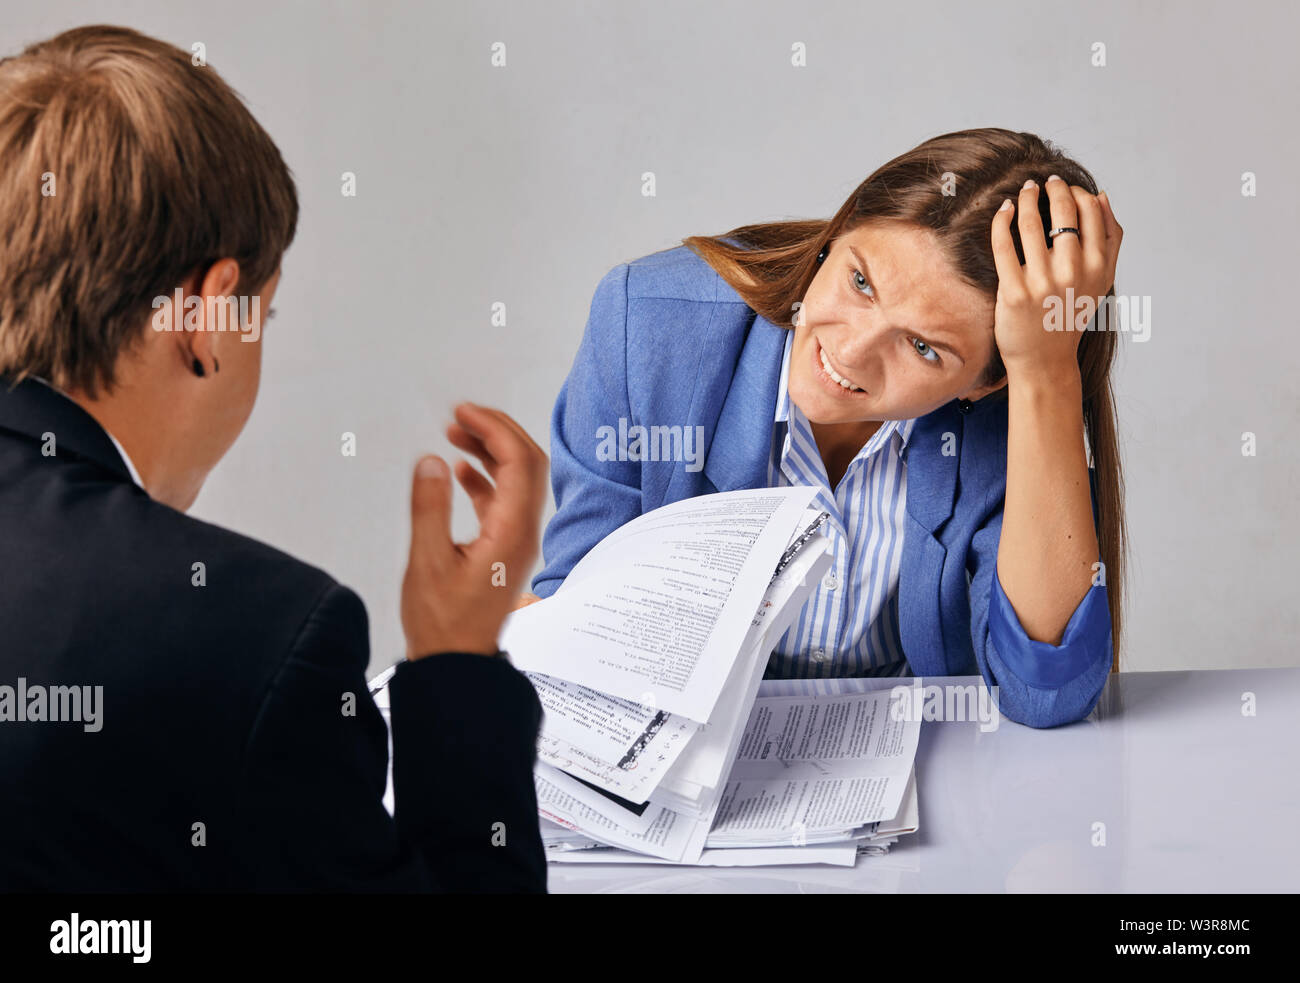 portrait of two people. Problems in their business relationships. Stock Photo